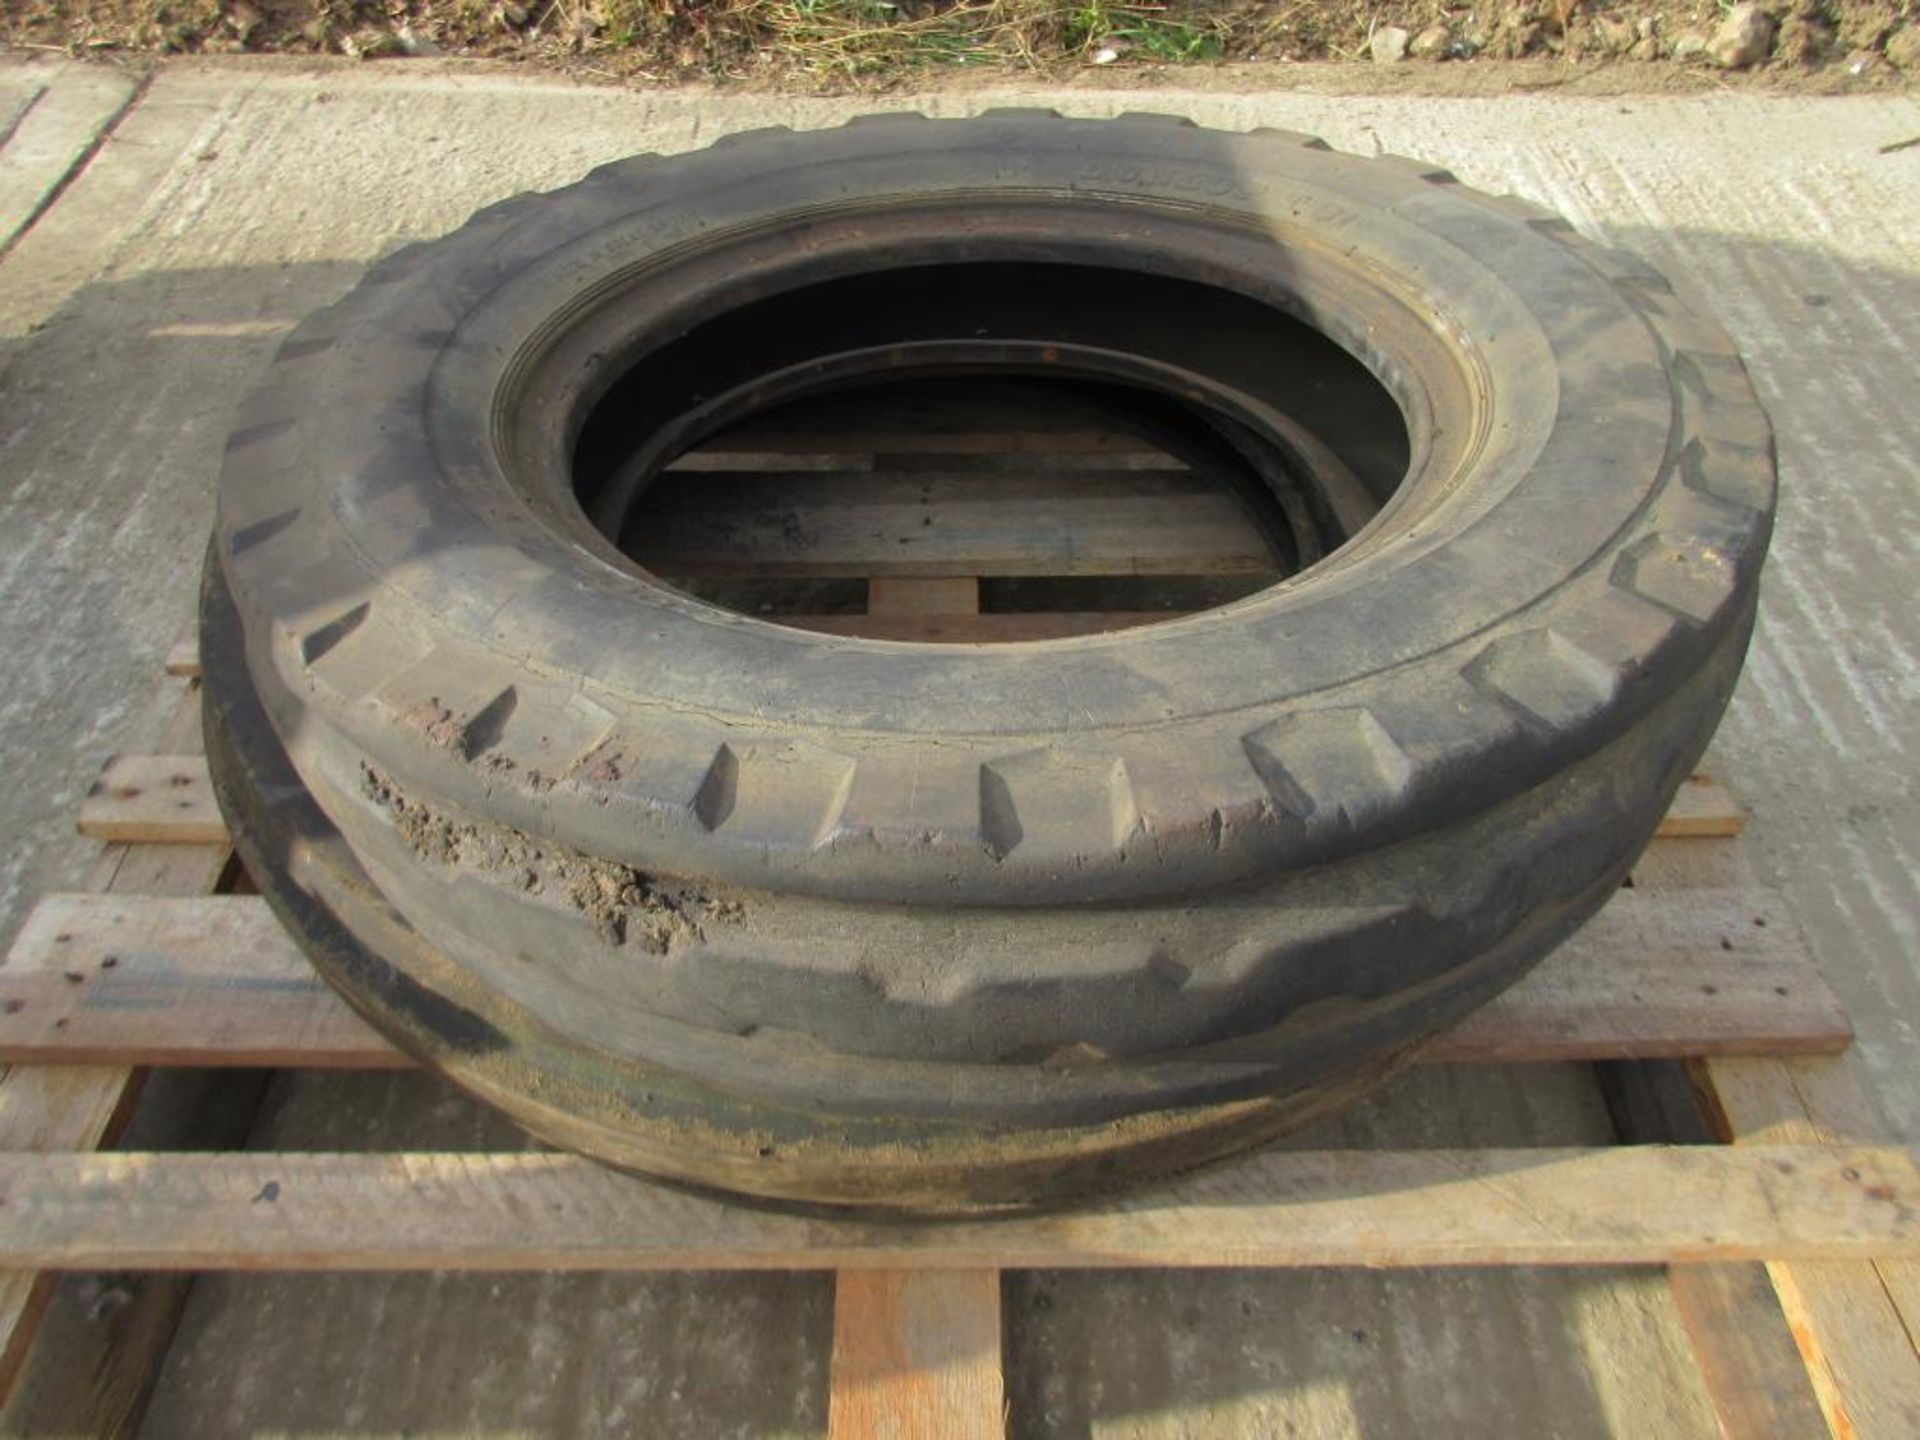 Single 7.50-18 front tyre